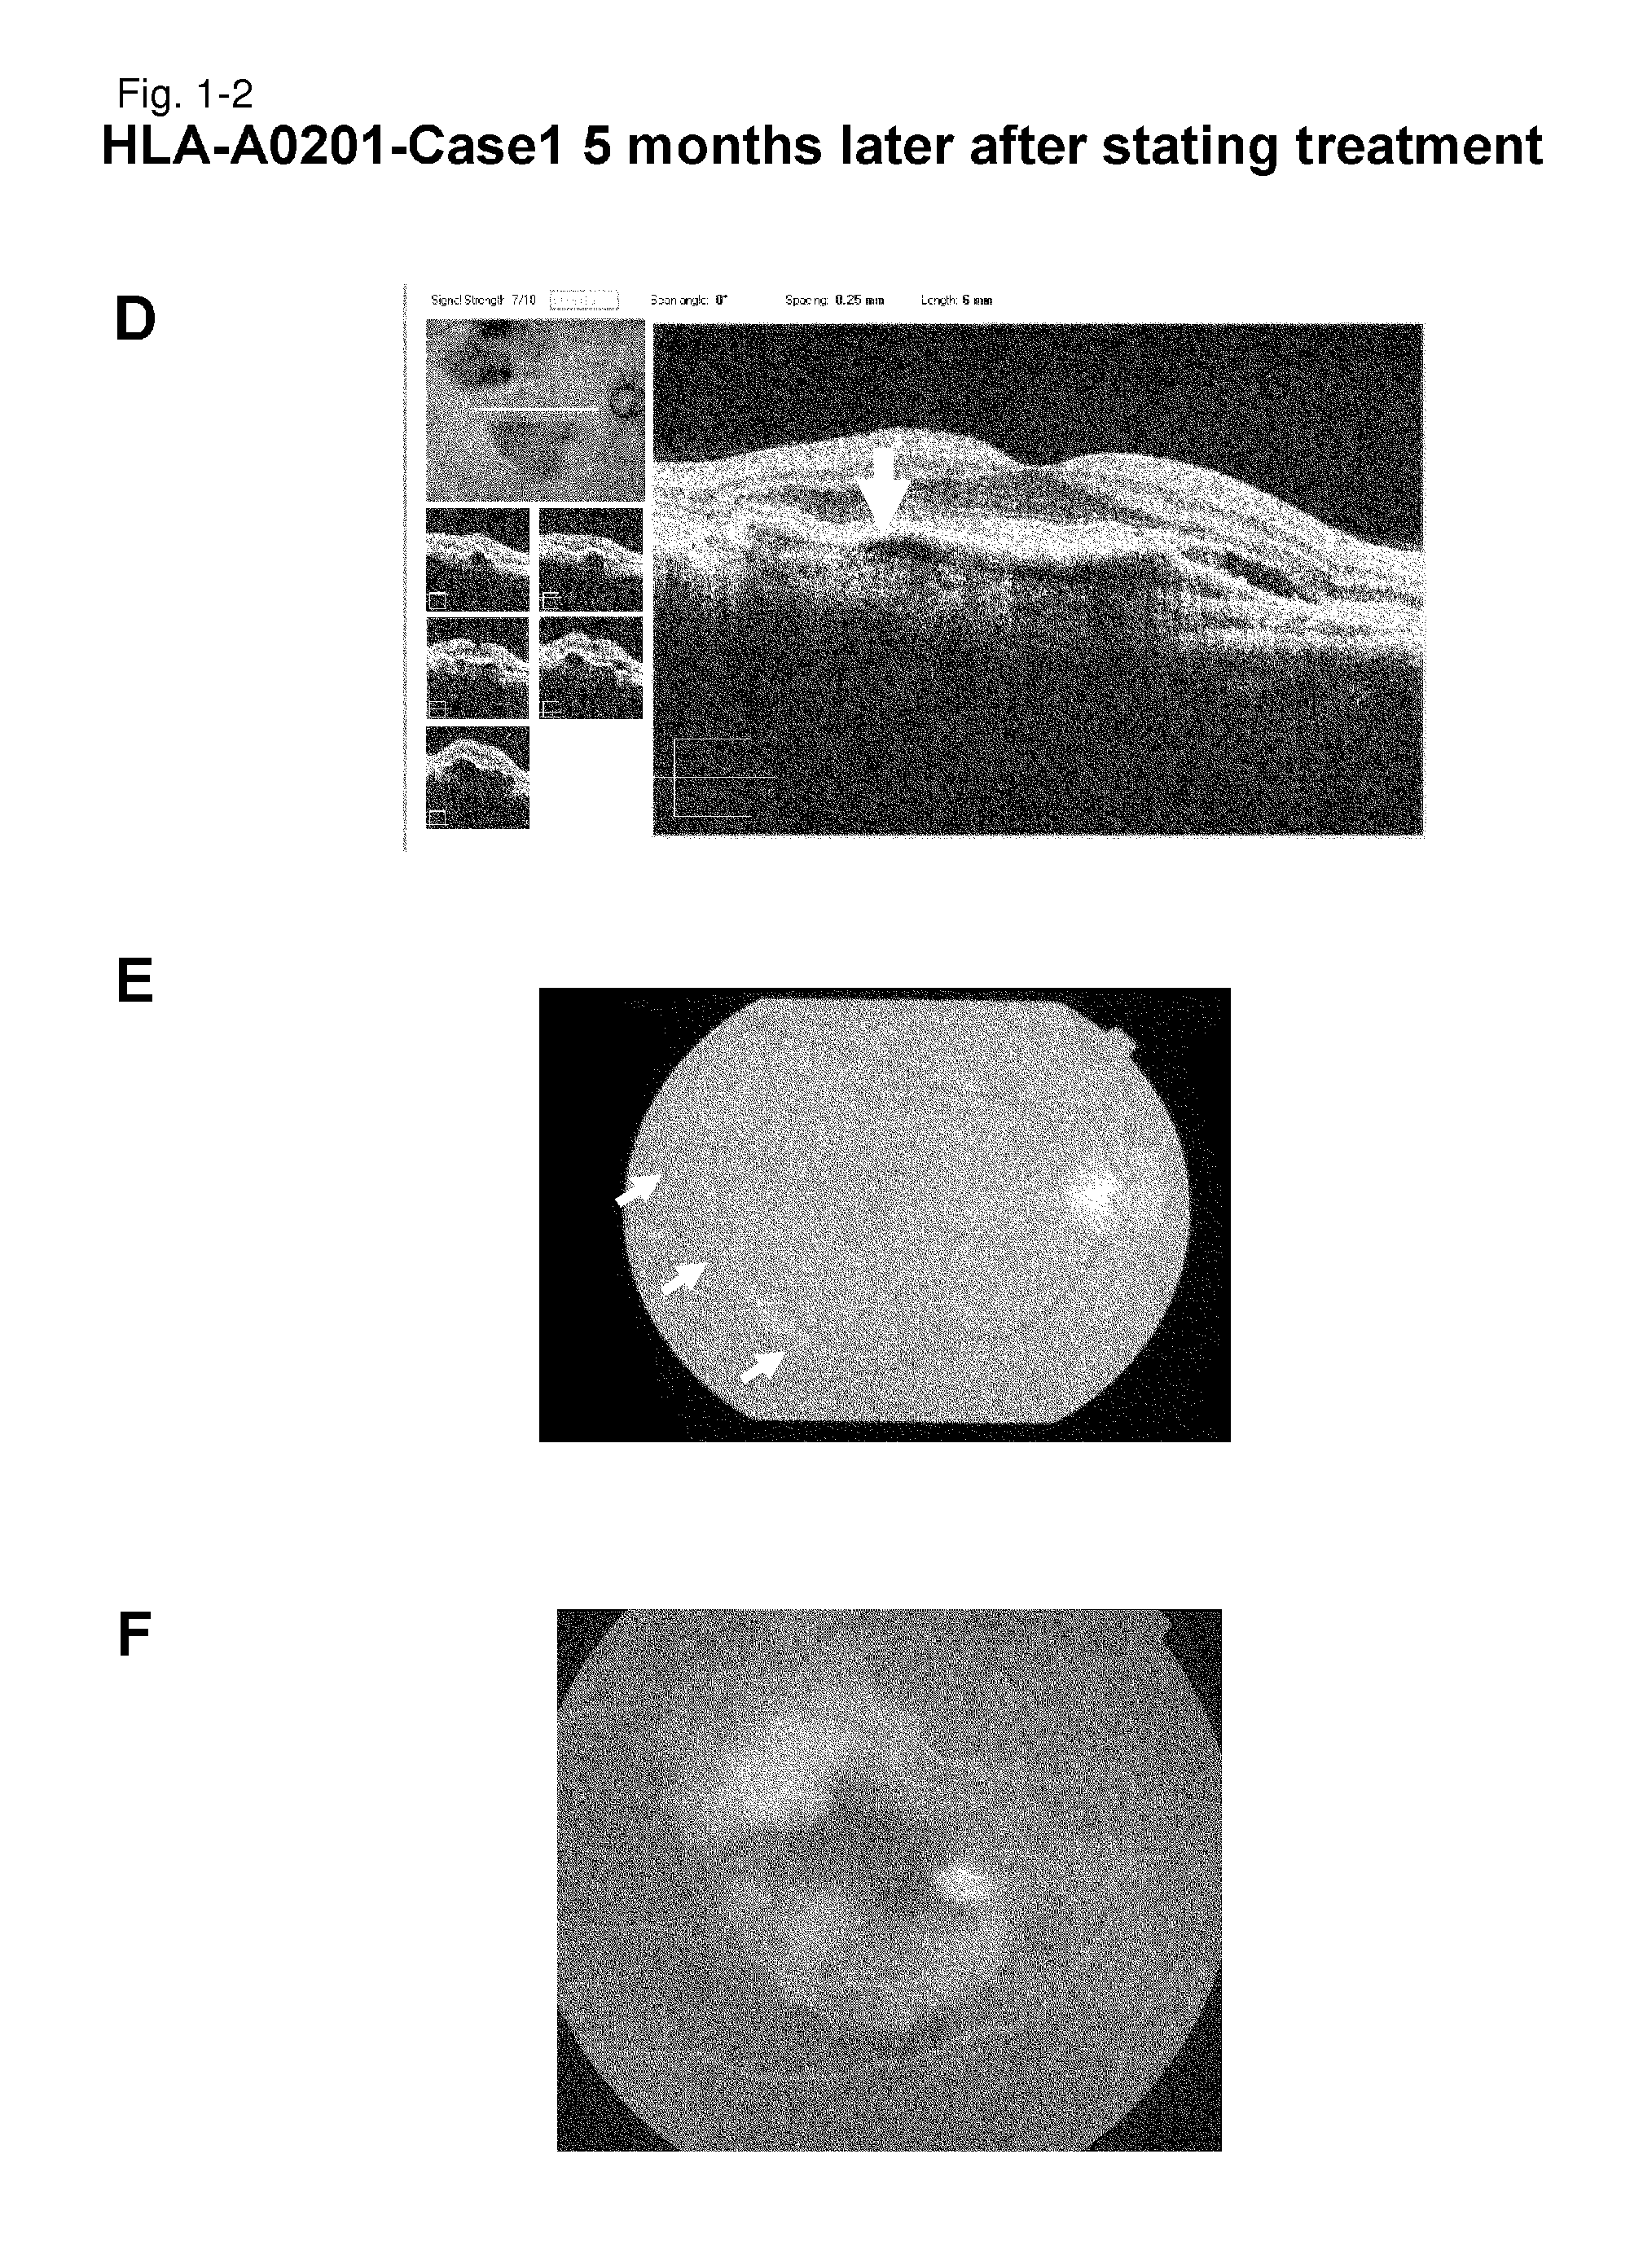 Methods for treating a disease caused by choroidal neovascularization